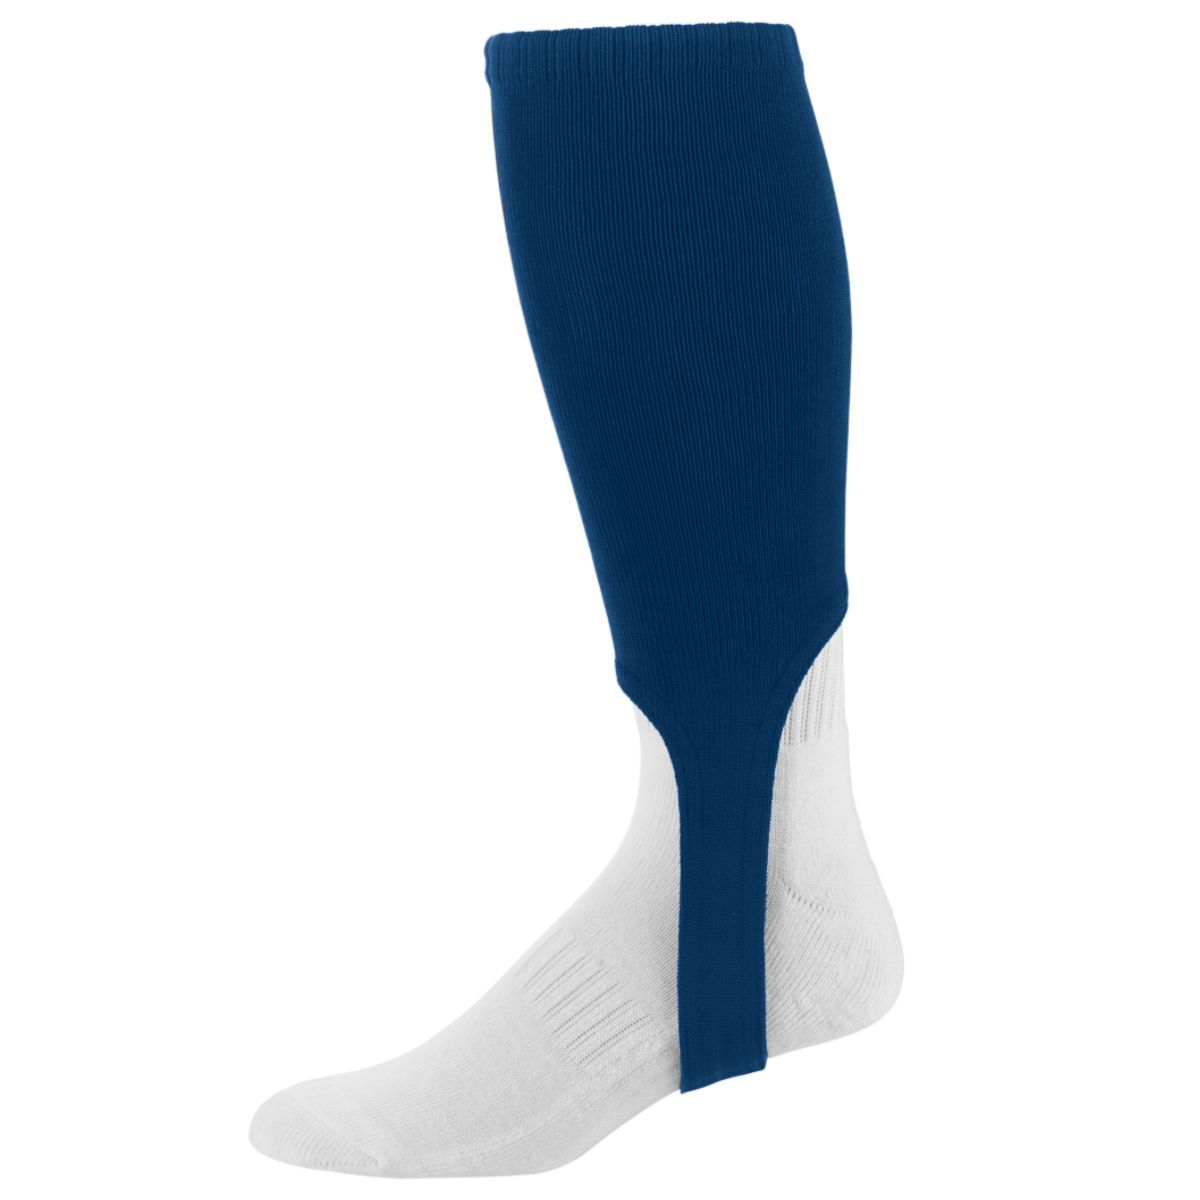 Augusta Sportswear Stirrup Sock in Navy  -Part of the Accessories, Augusta-Products, Accessories-Socks, Baseball, All-Sports, All-Sports-1 product lines at KanaleyCreations.com